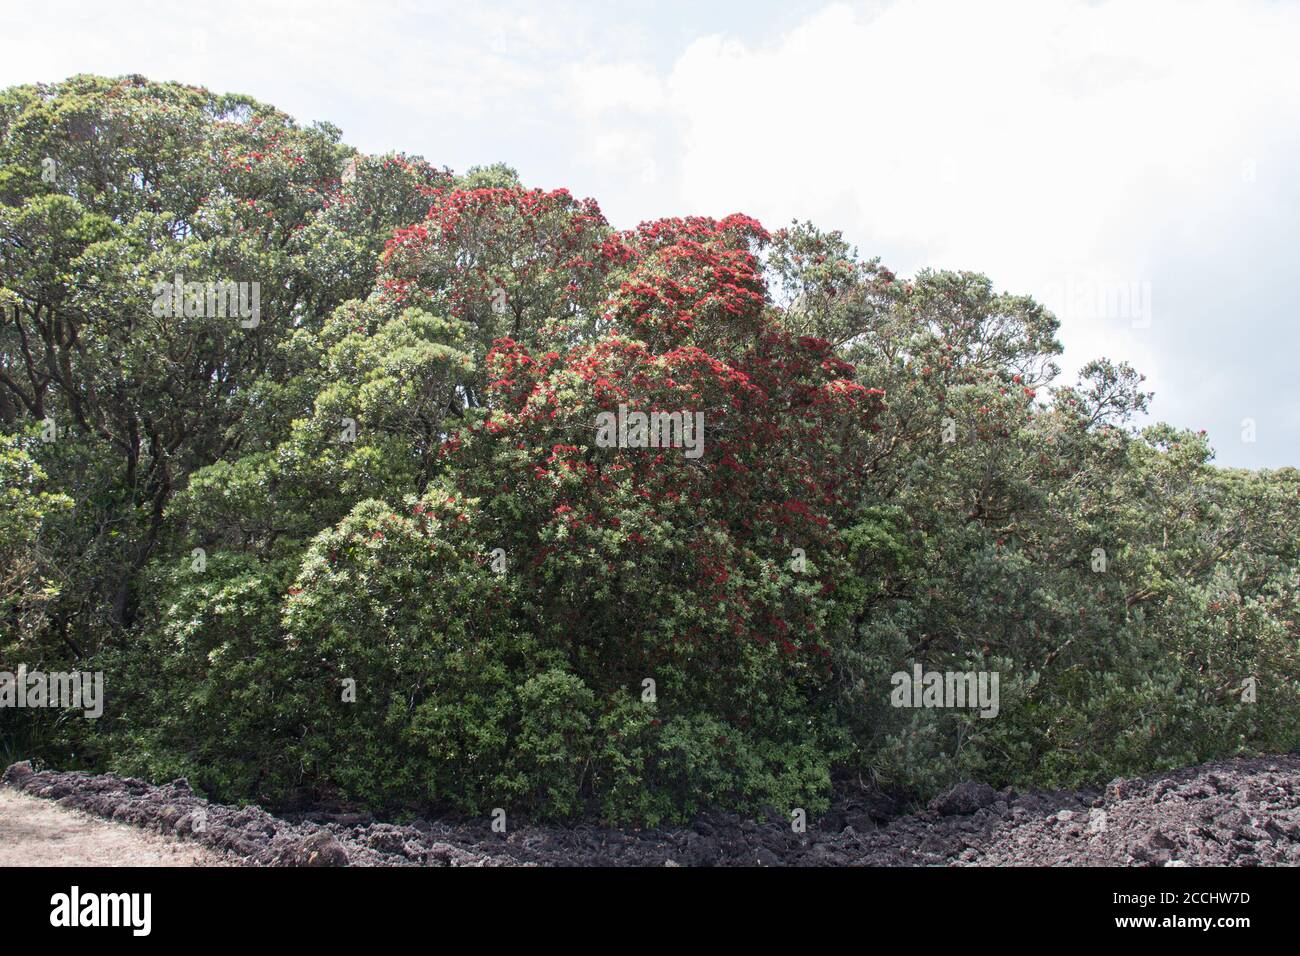 The view of pohutukawa tree in bloom. Stock Photo